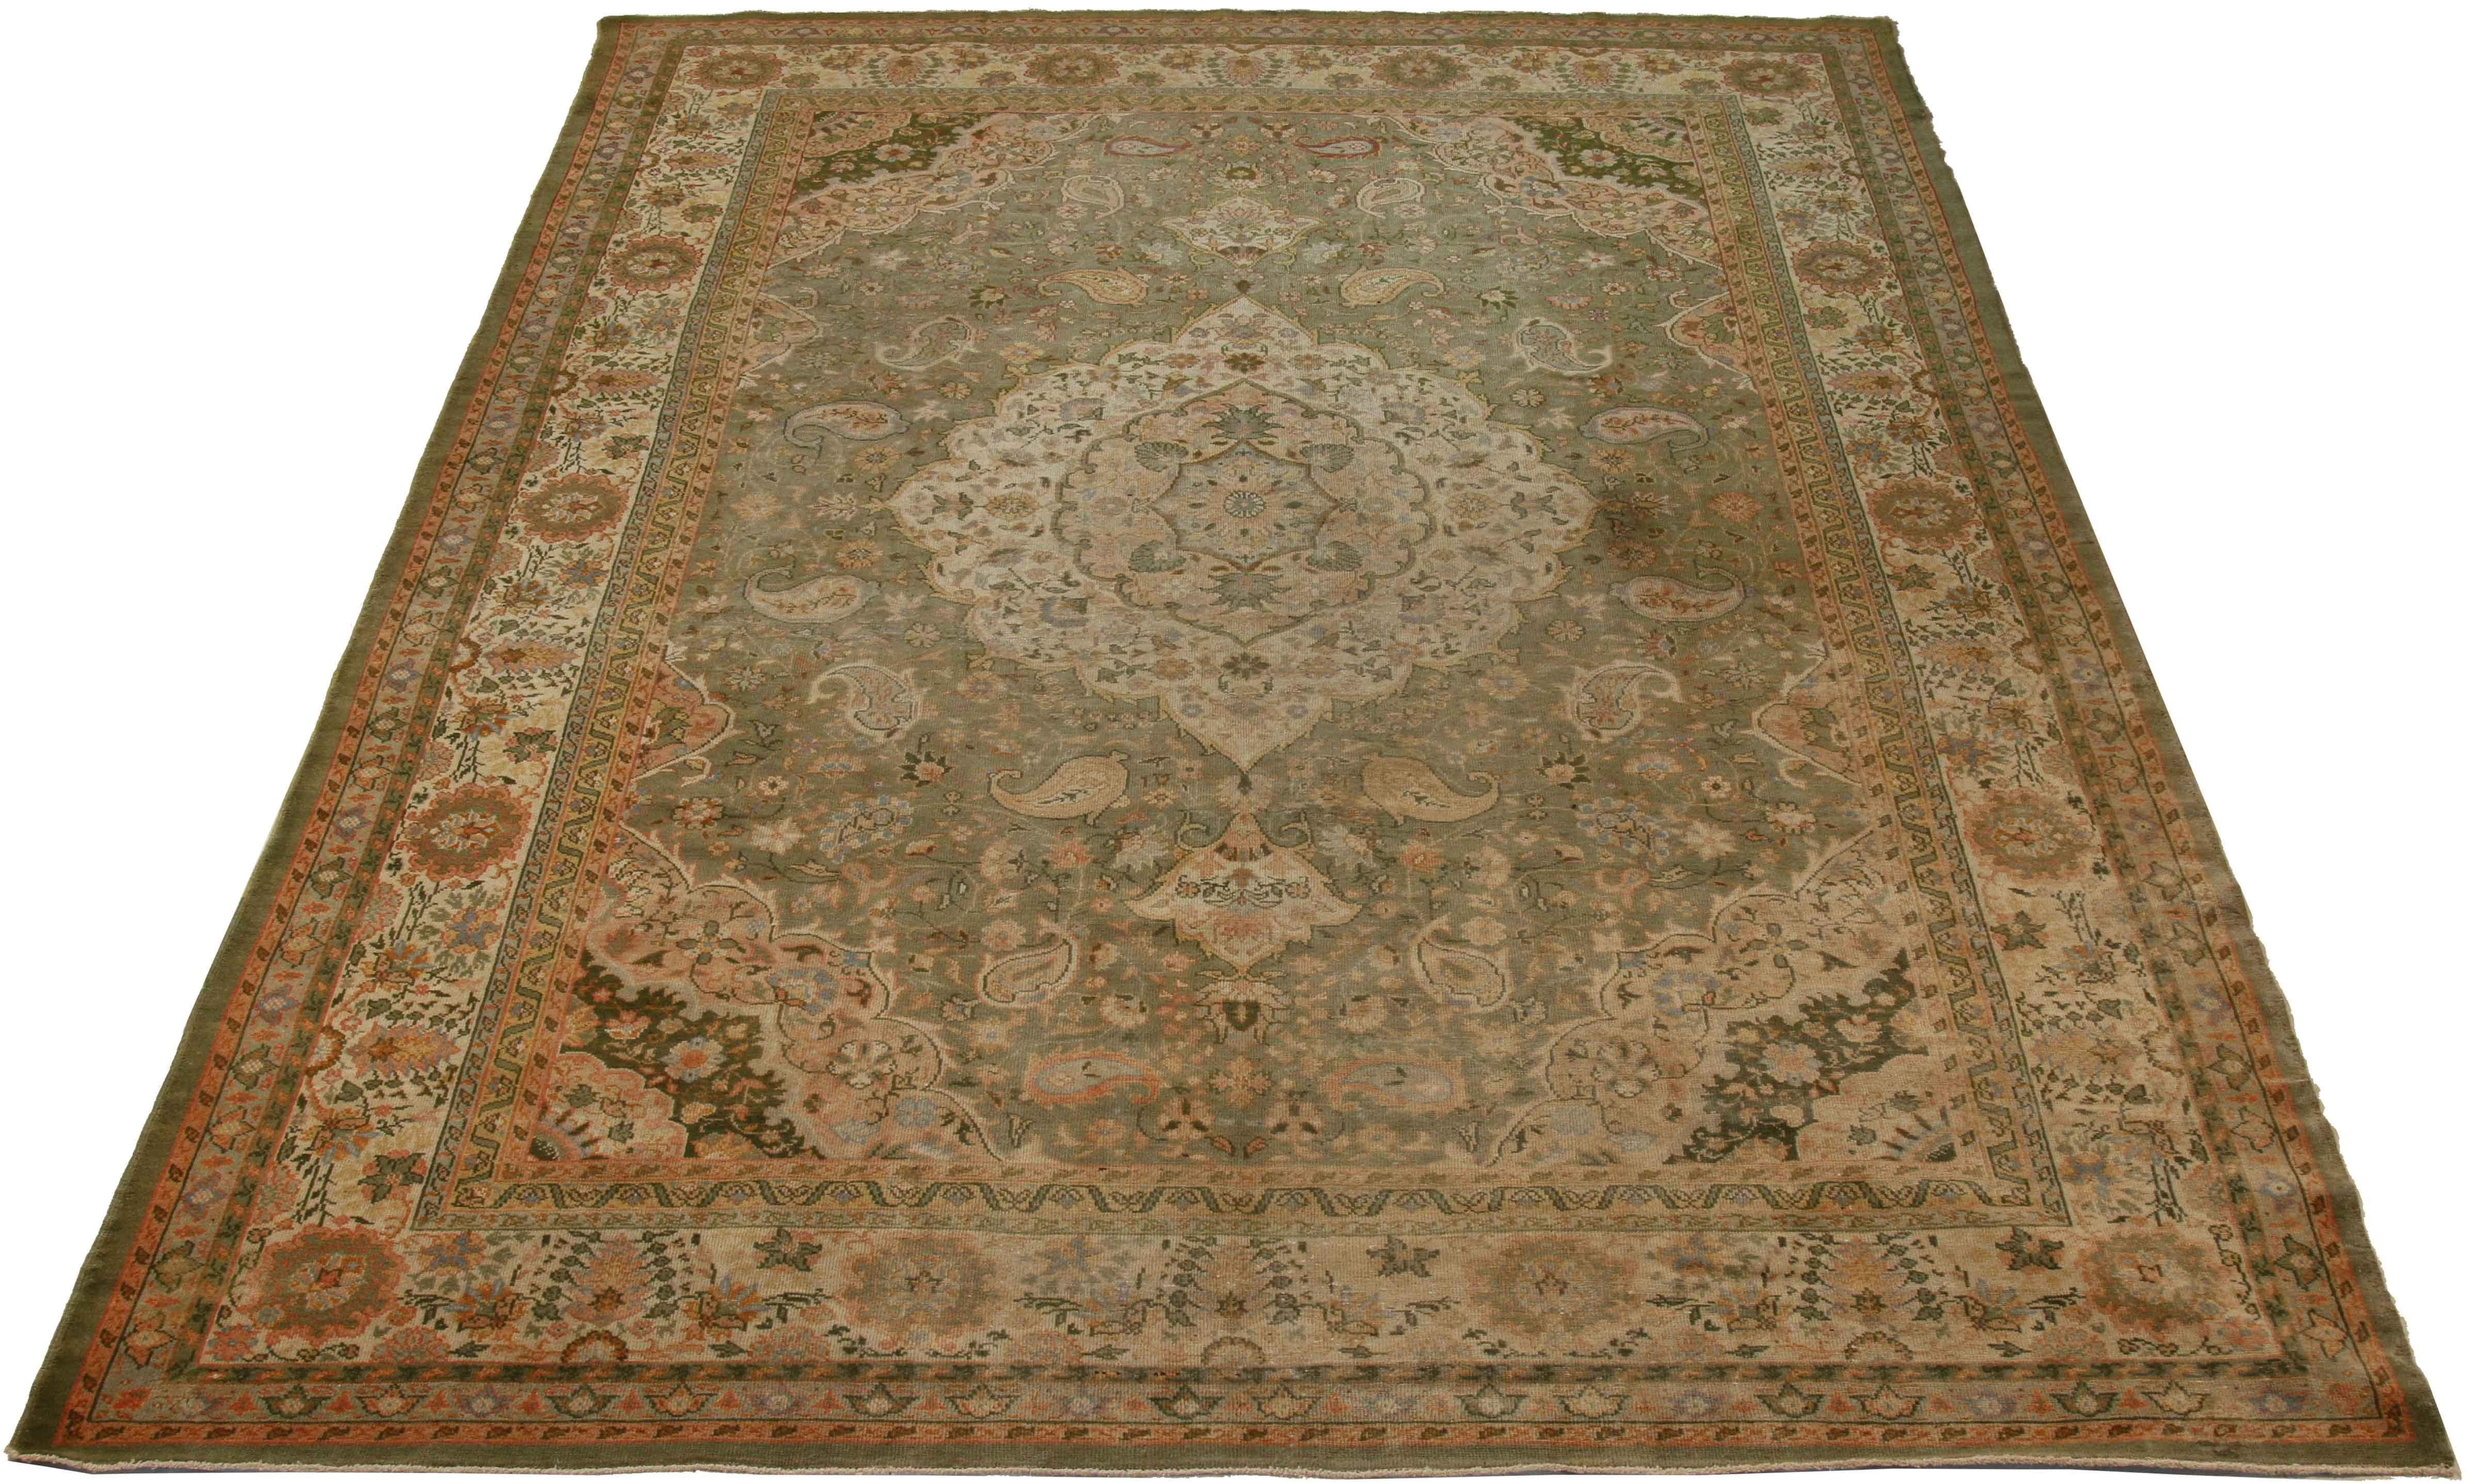 Large Antique Sultanabad Persian Rug with Green & White Floral Motif, circa 1930 In Excellent Condition For Sale In Dallas, TX